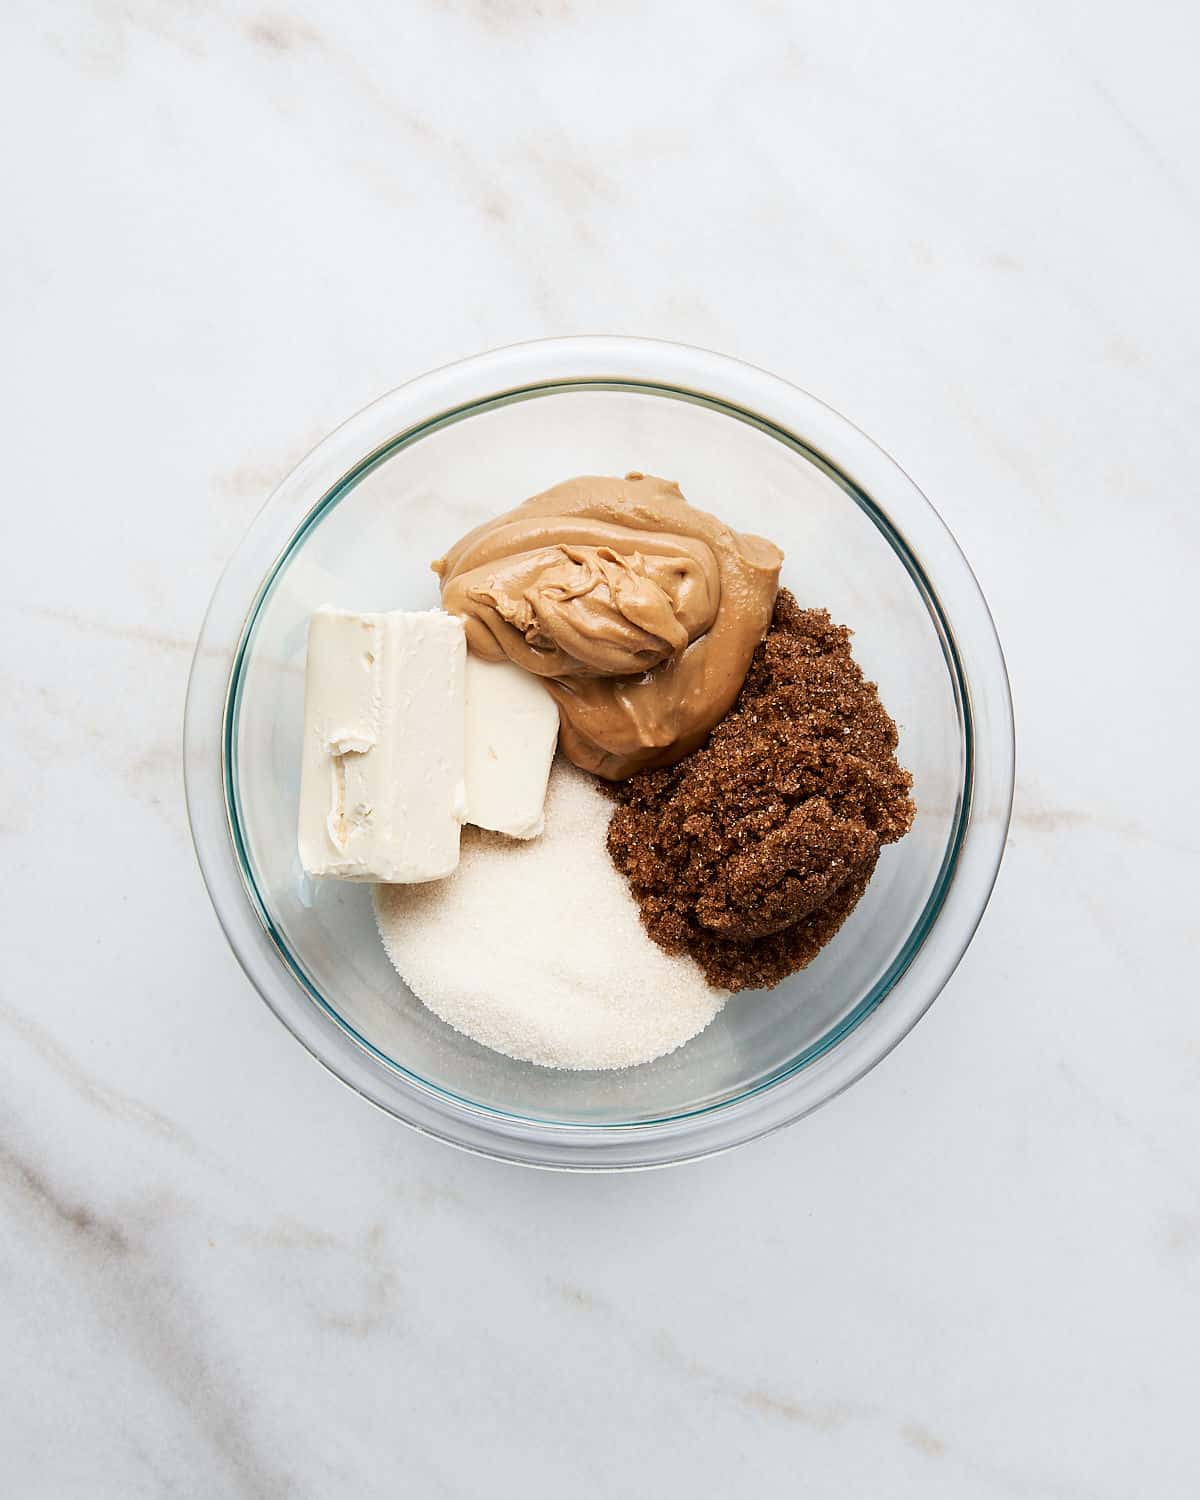 Brown sugar, butter, sugar, and peanut butter in a glass bowl on a white marble surface.